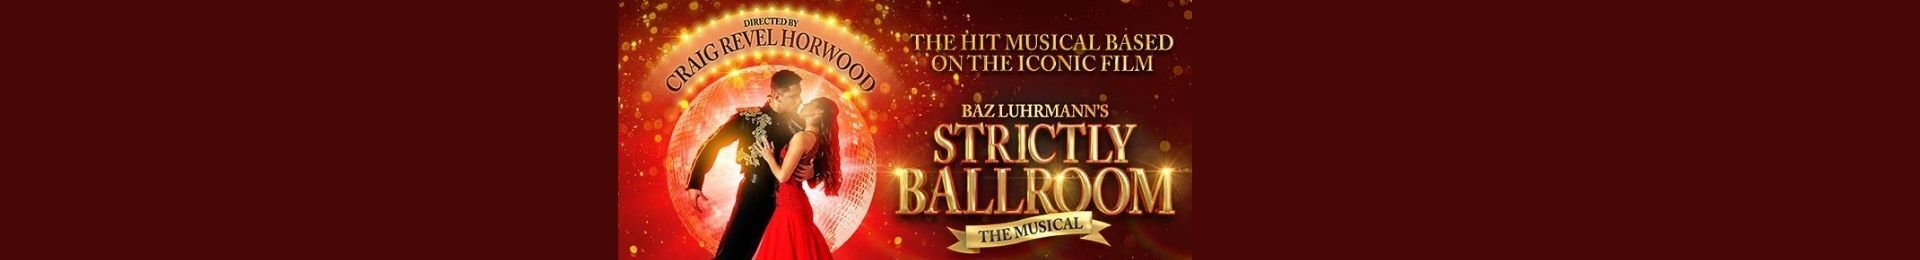 Strictly Ballroom - Manchester banner image